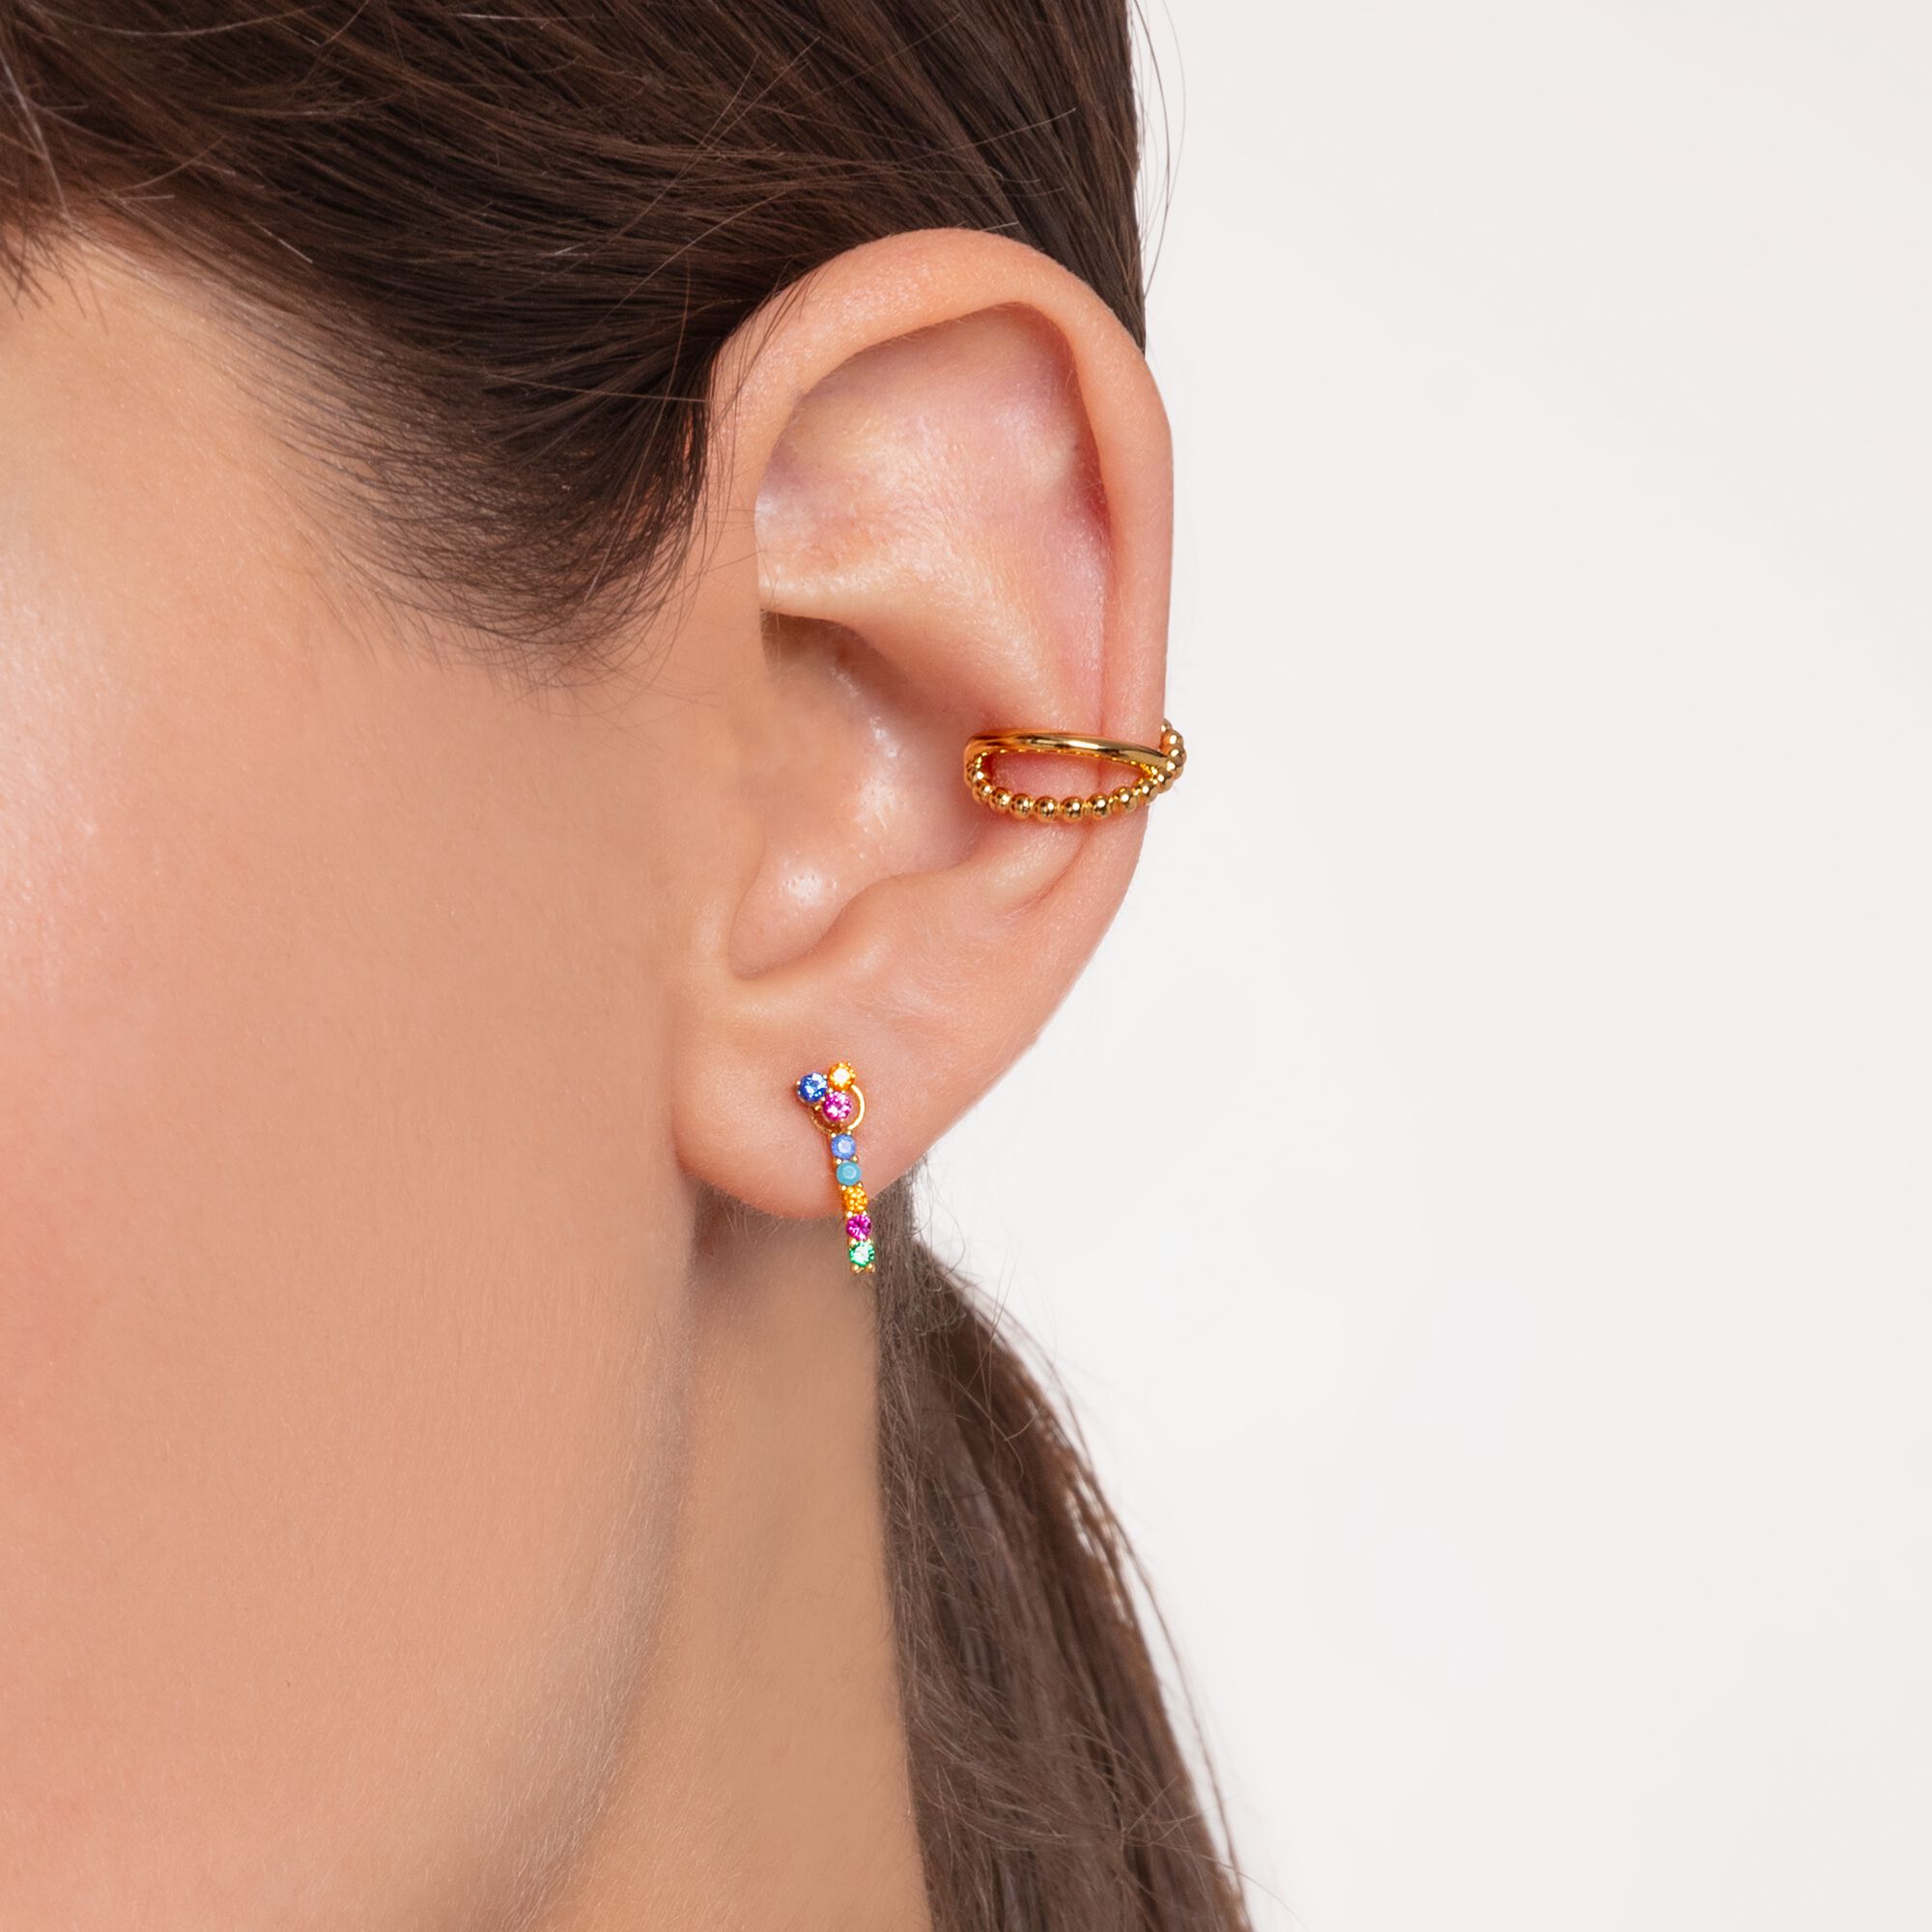 Ear cuff: Piercing-style in gold optic with THOMAS SABO